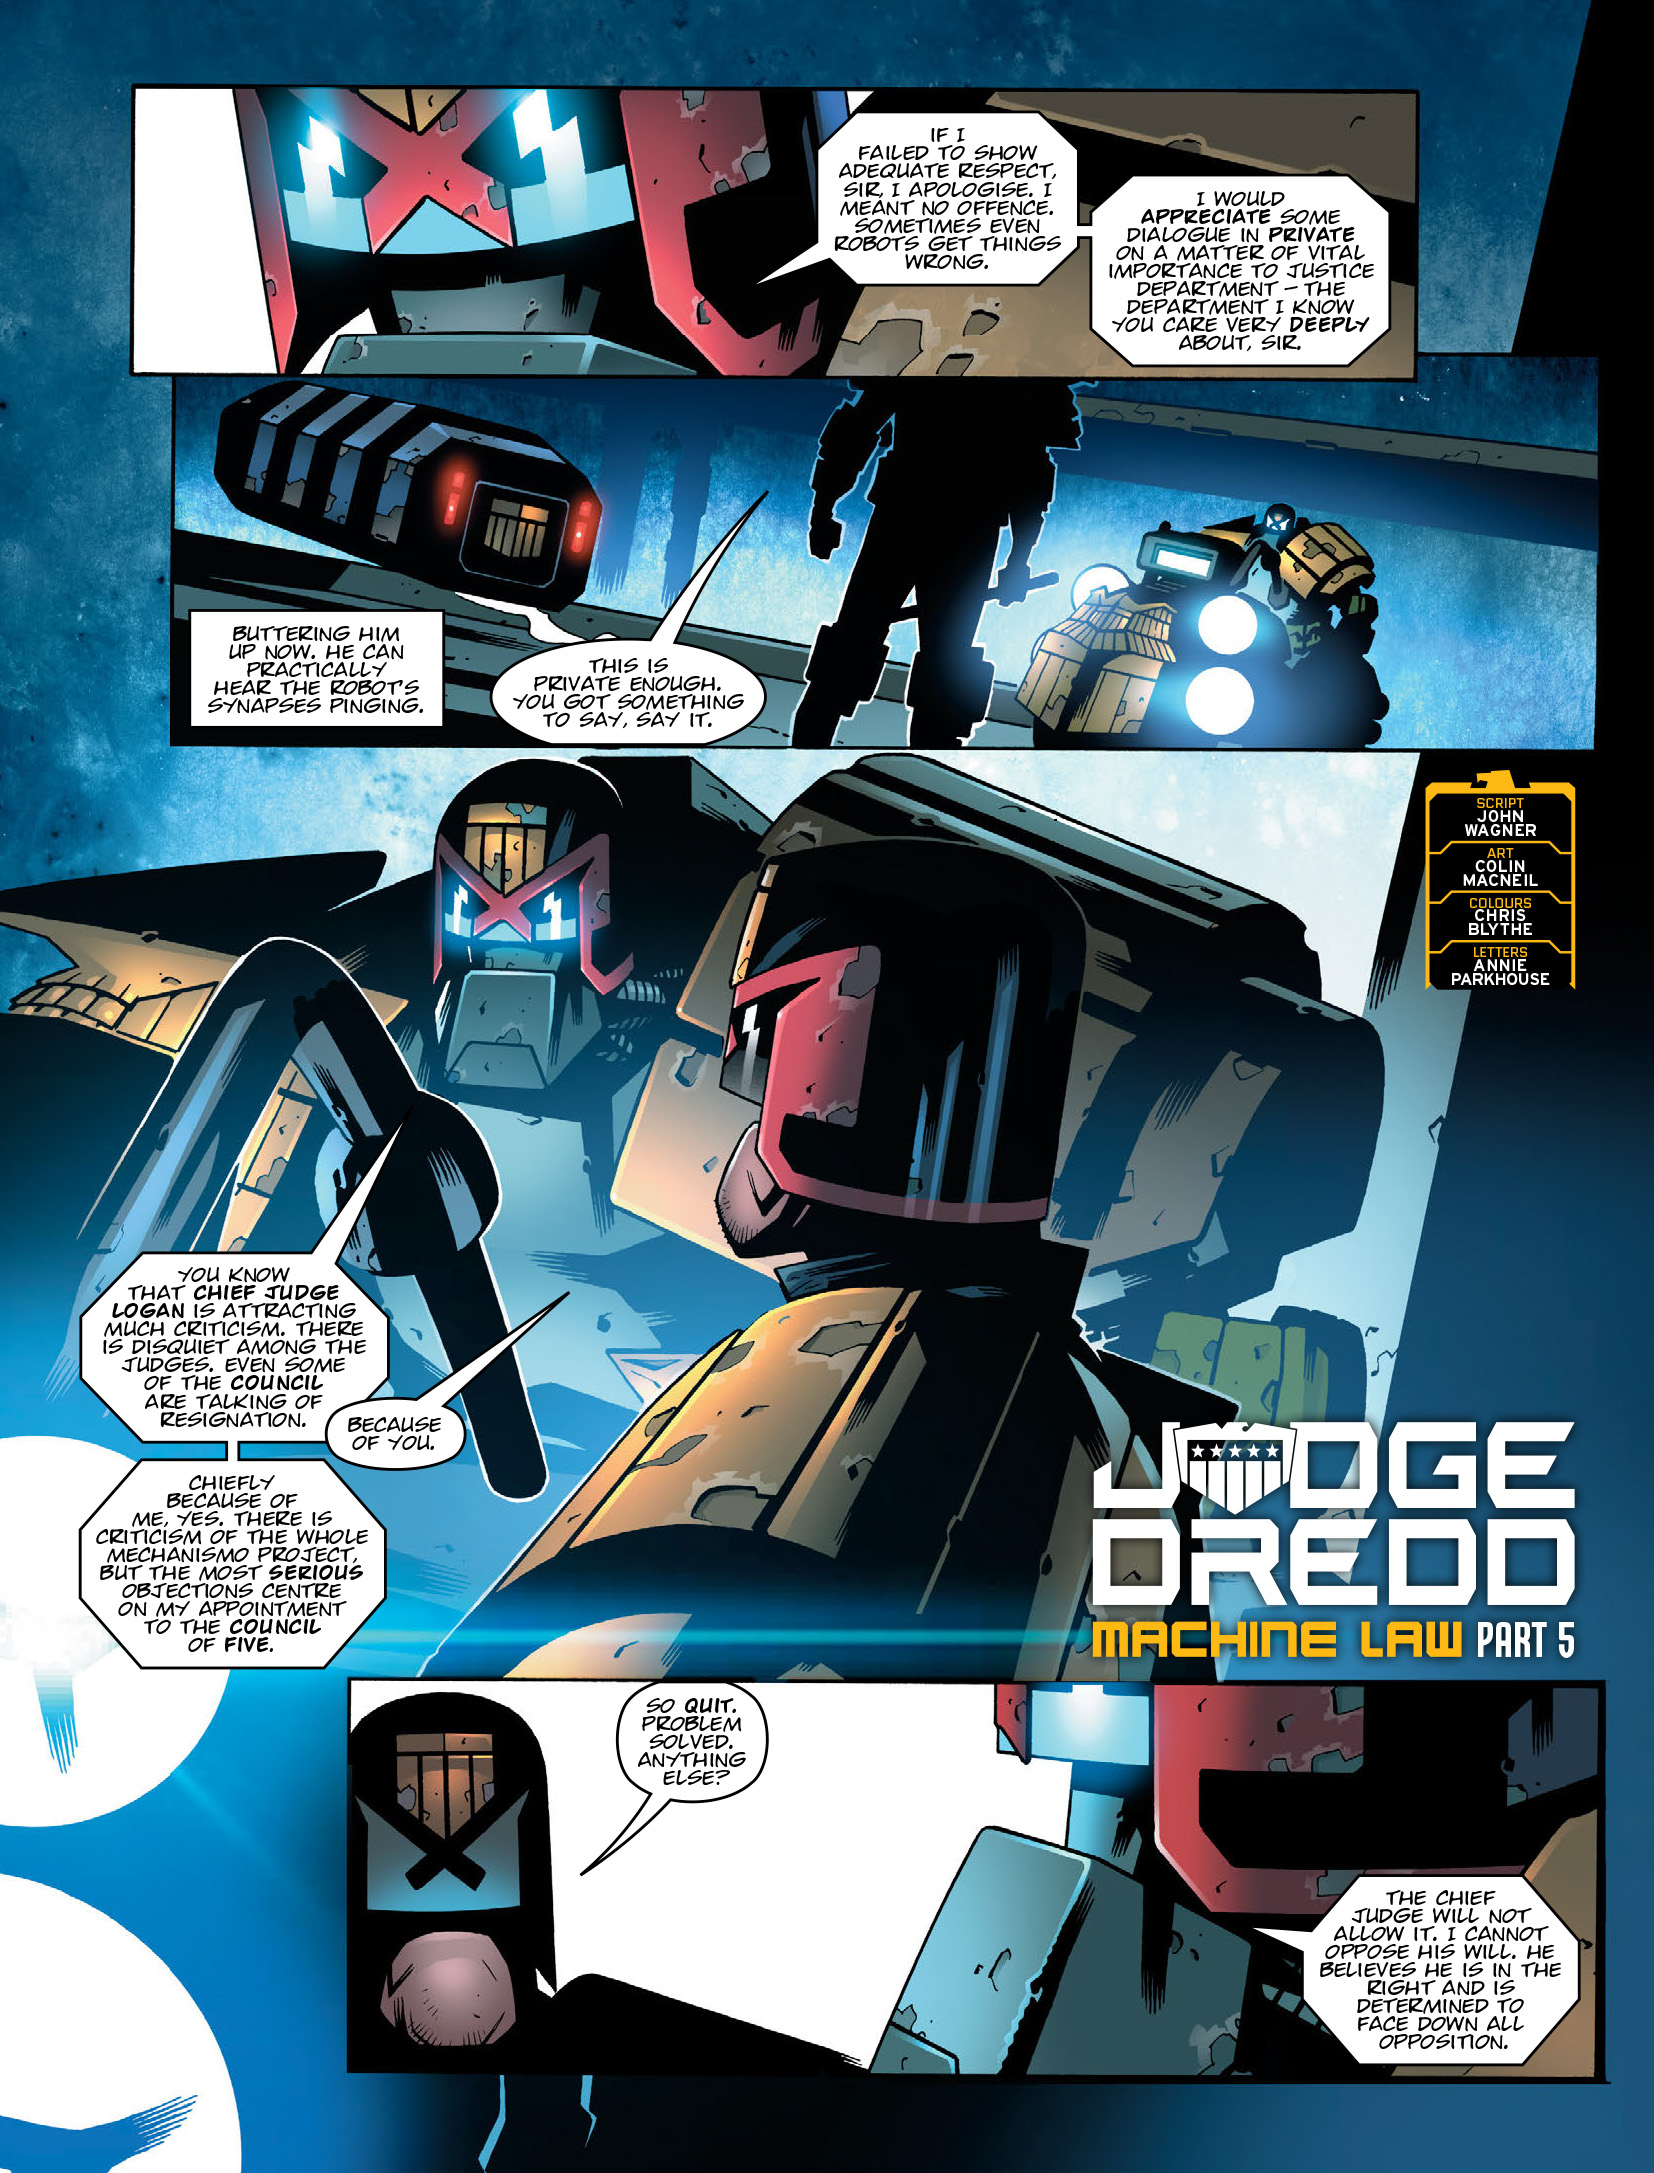 2000 AD: Chapter 2119 - Page 3